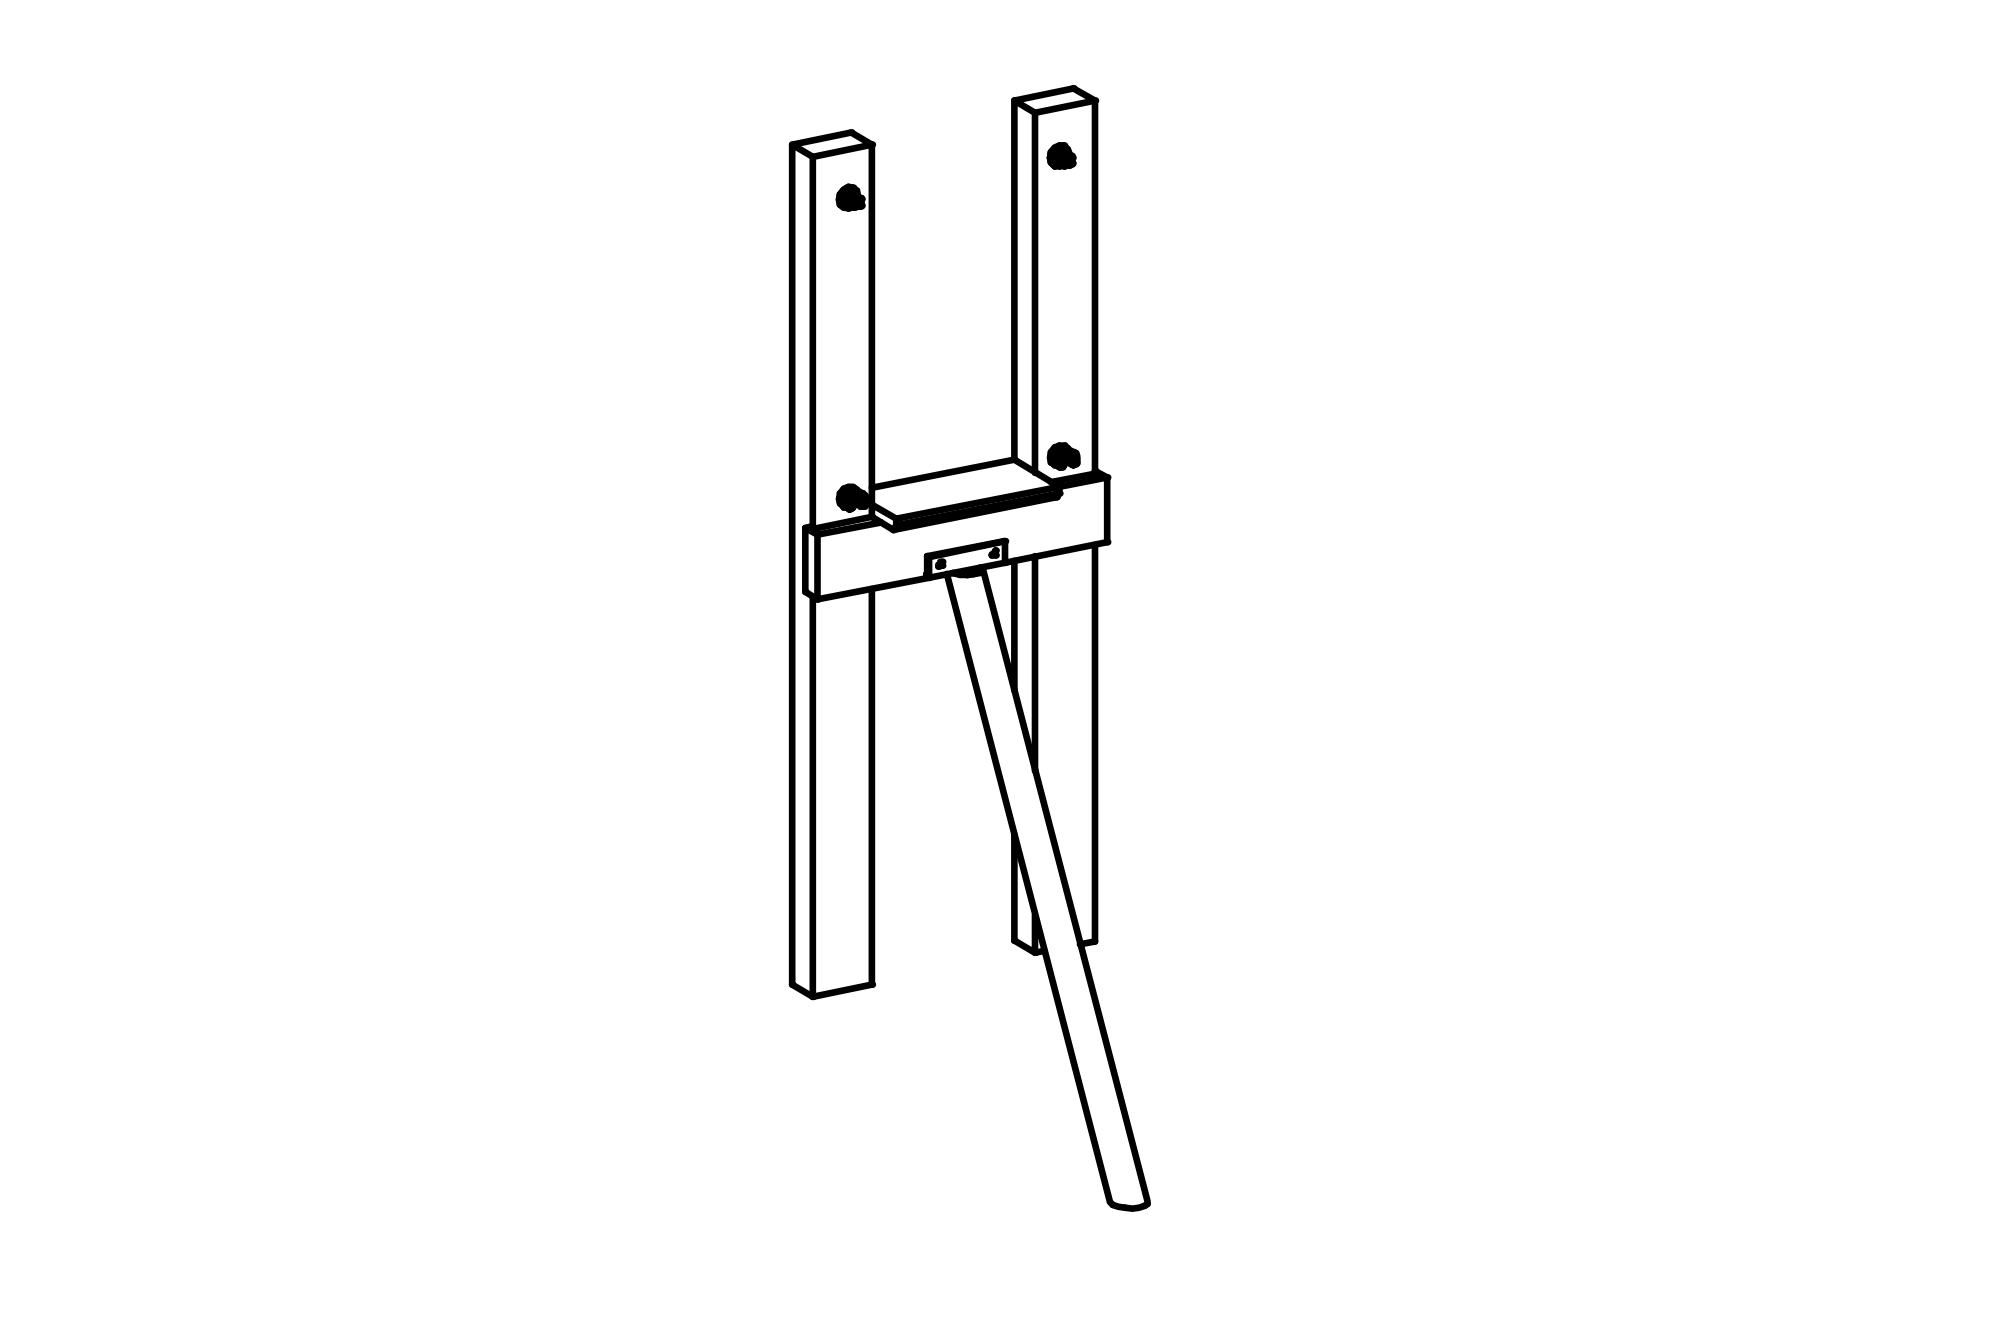 Support Frame for suspension bridge, height = 1.50 m